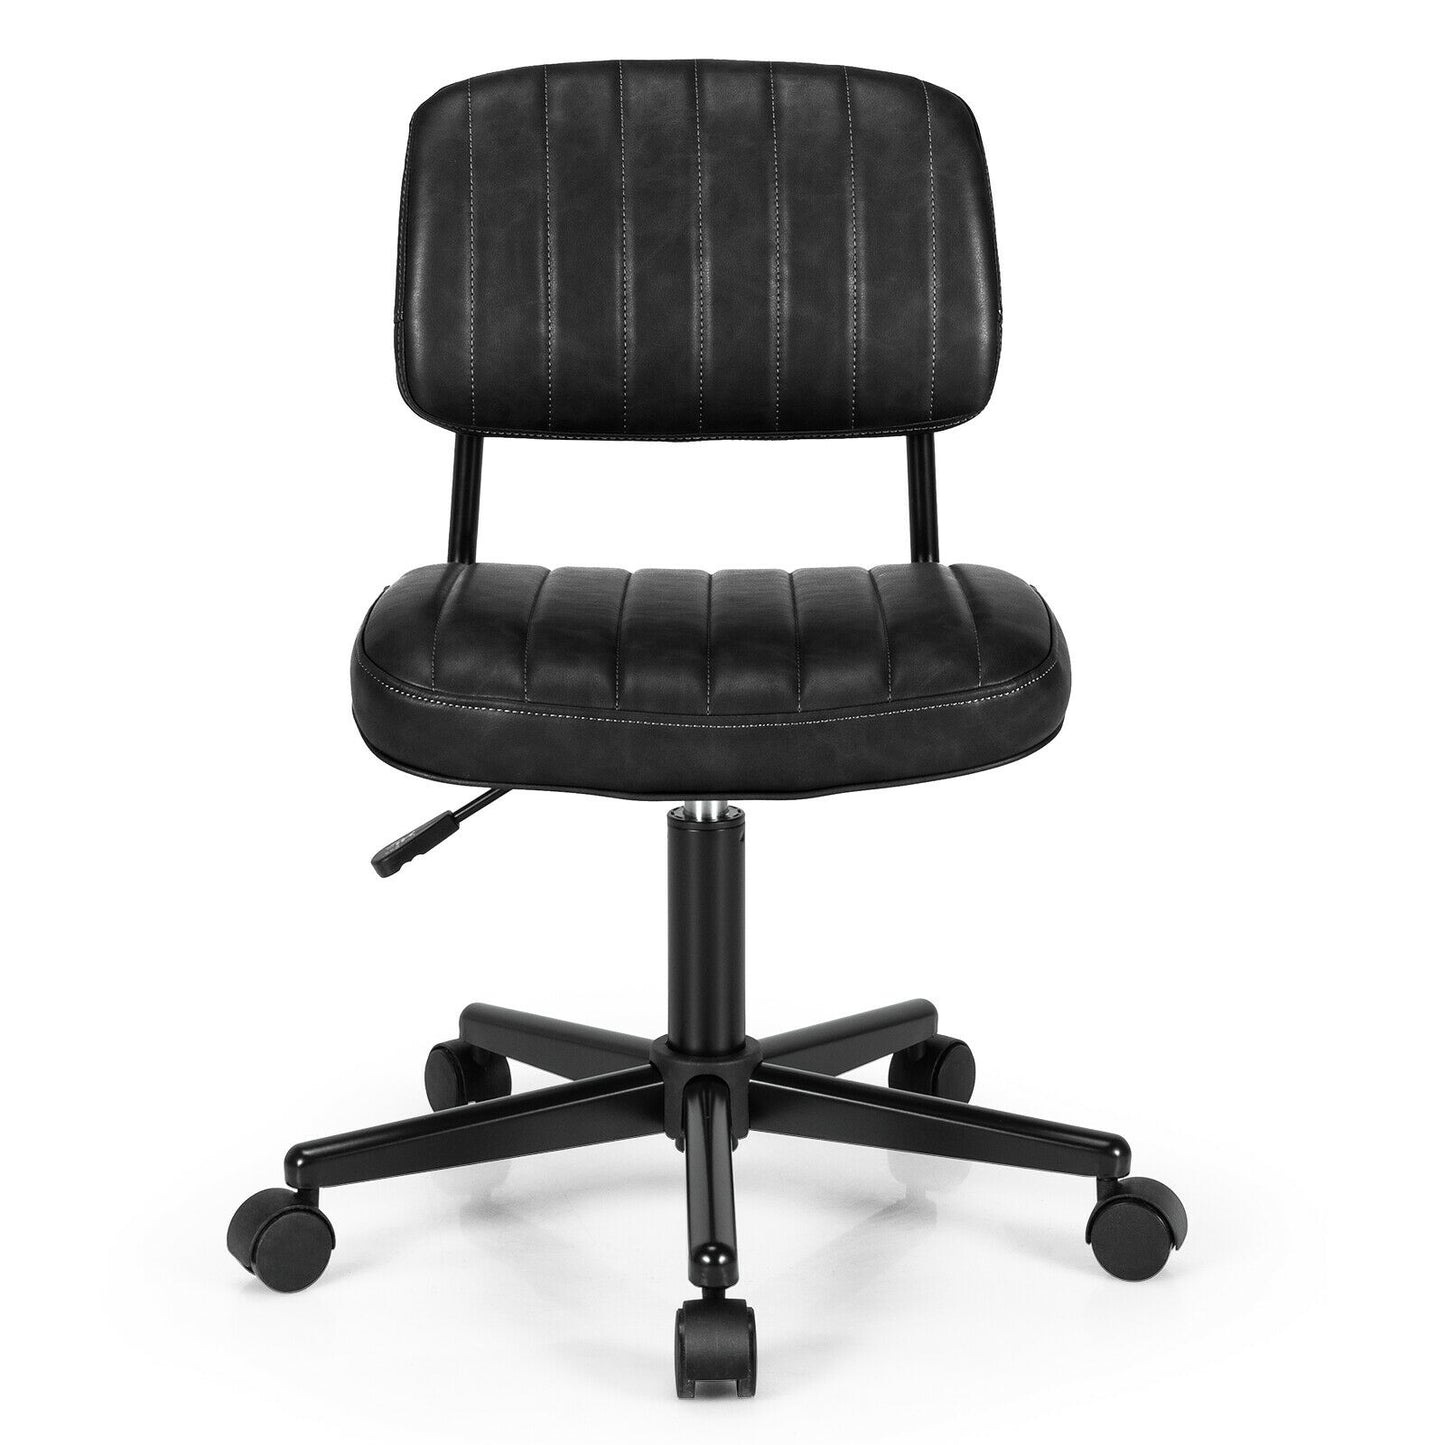 PU Leather Adjustable Office Chair  Swivel Task Chair with Backrest-Black